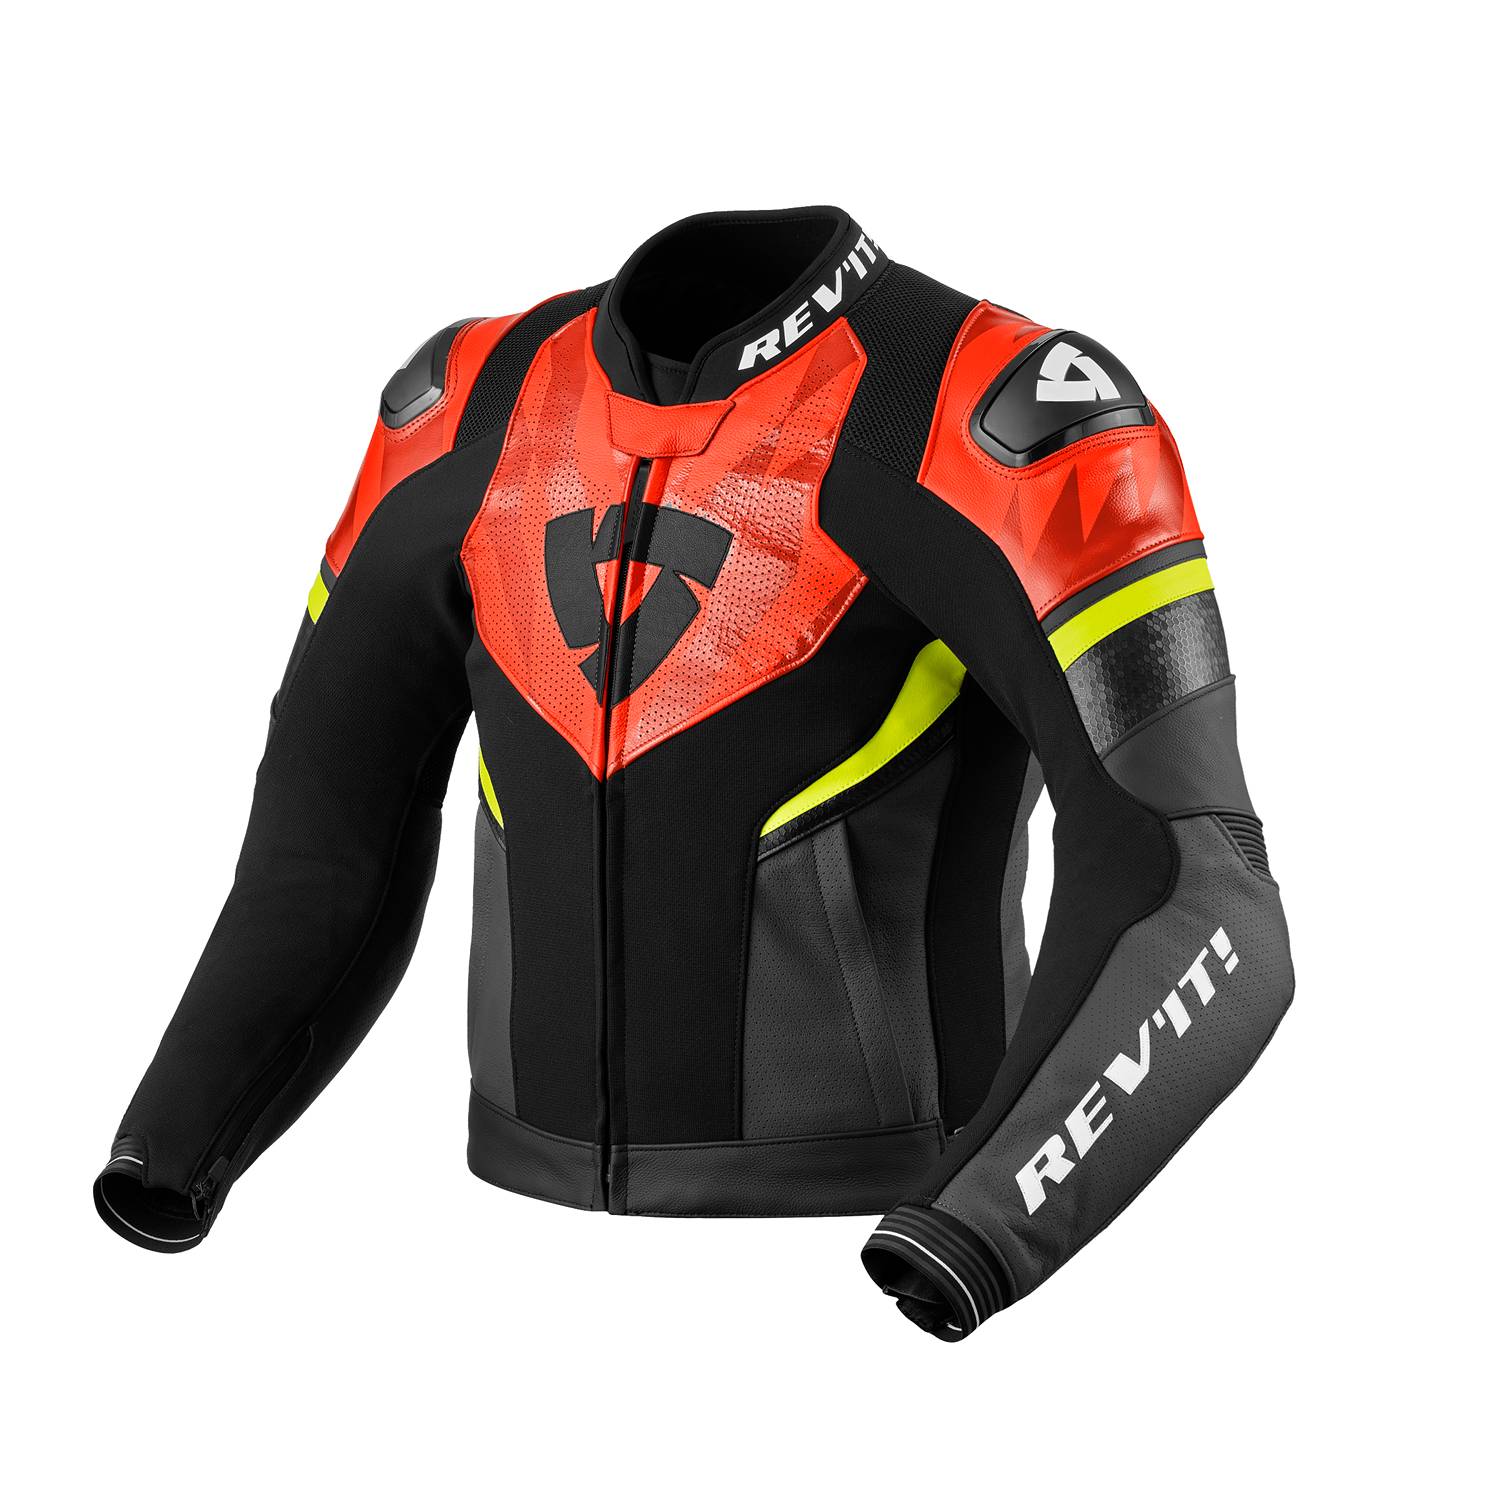 Image of REV'IT! Hyperspeed 2 Air Jacket Black Neon Red Size 52 ID 8700001358552